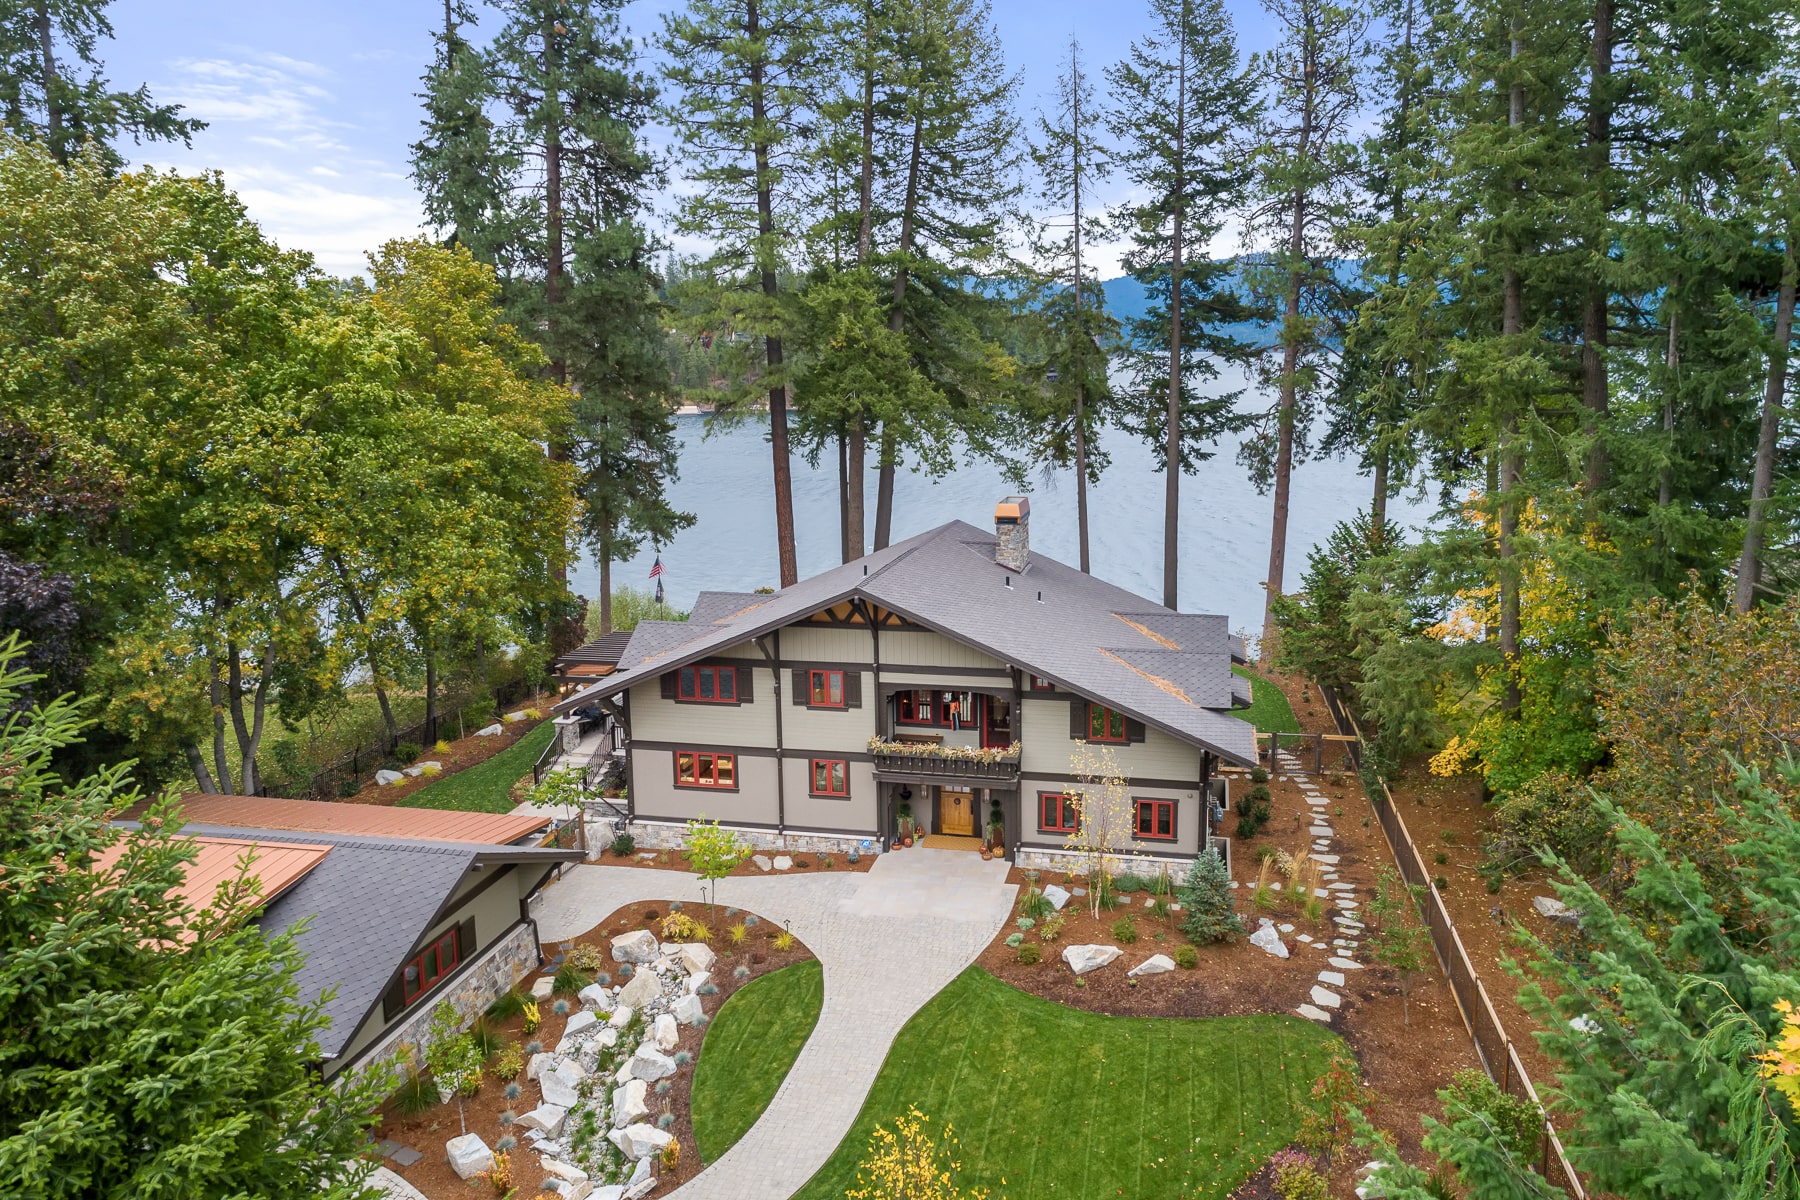 mittmann-architect-Hayden-Lake-Chalet-Remodel-outside-and-lakeside